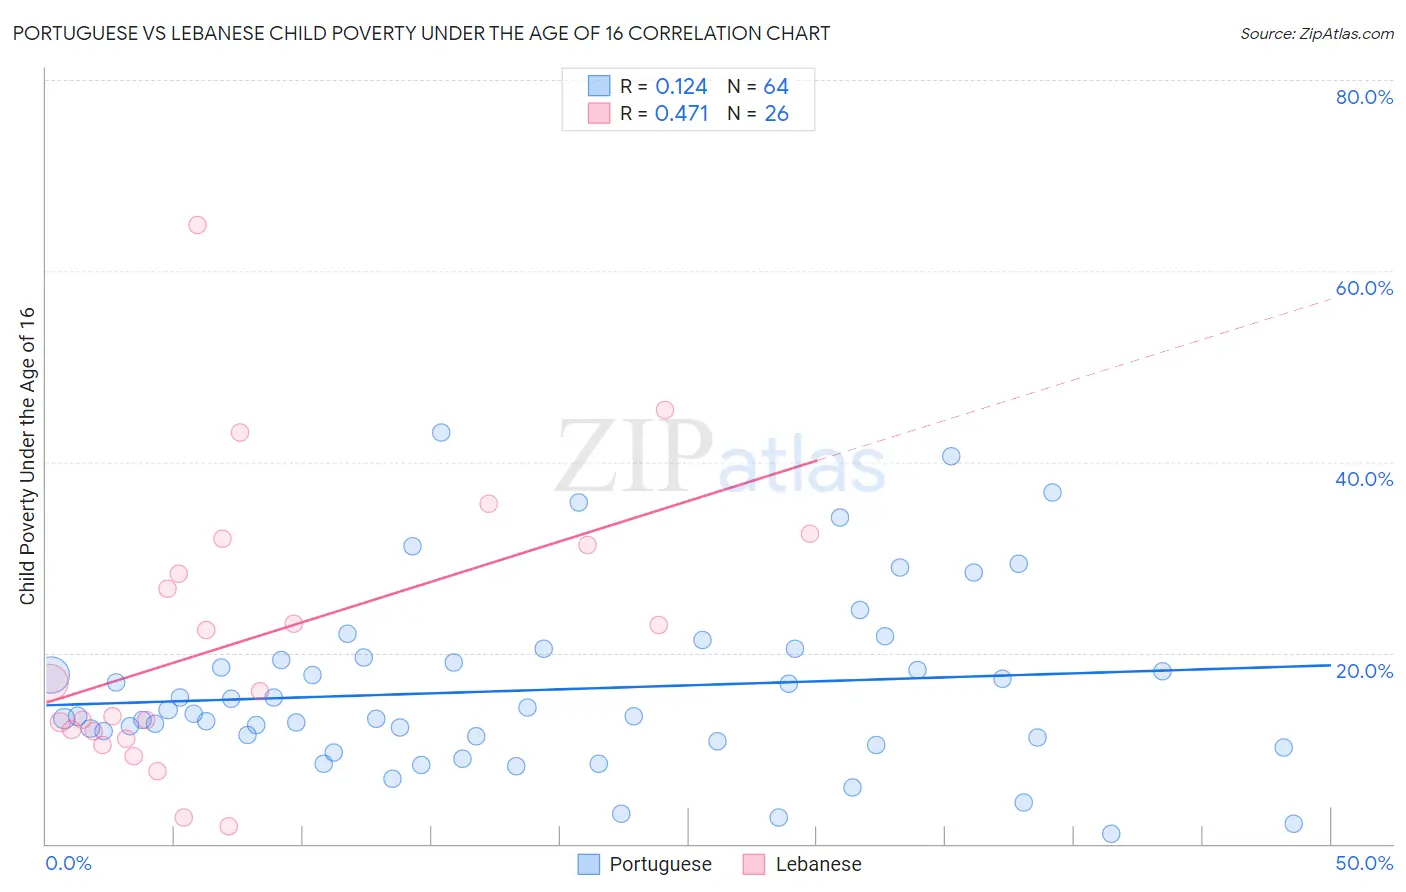 Portuguese vs Lebanese Child Poverty Under the Age of 16